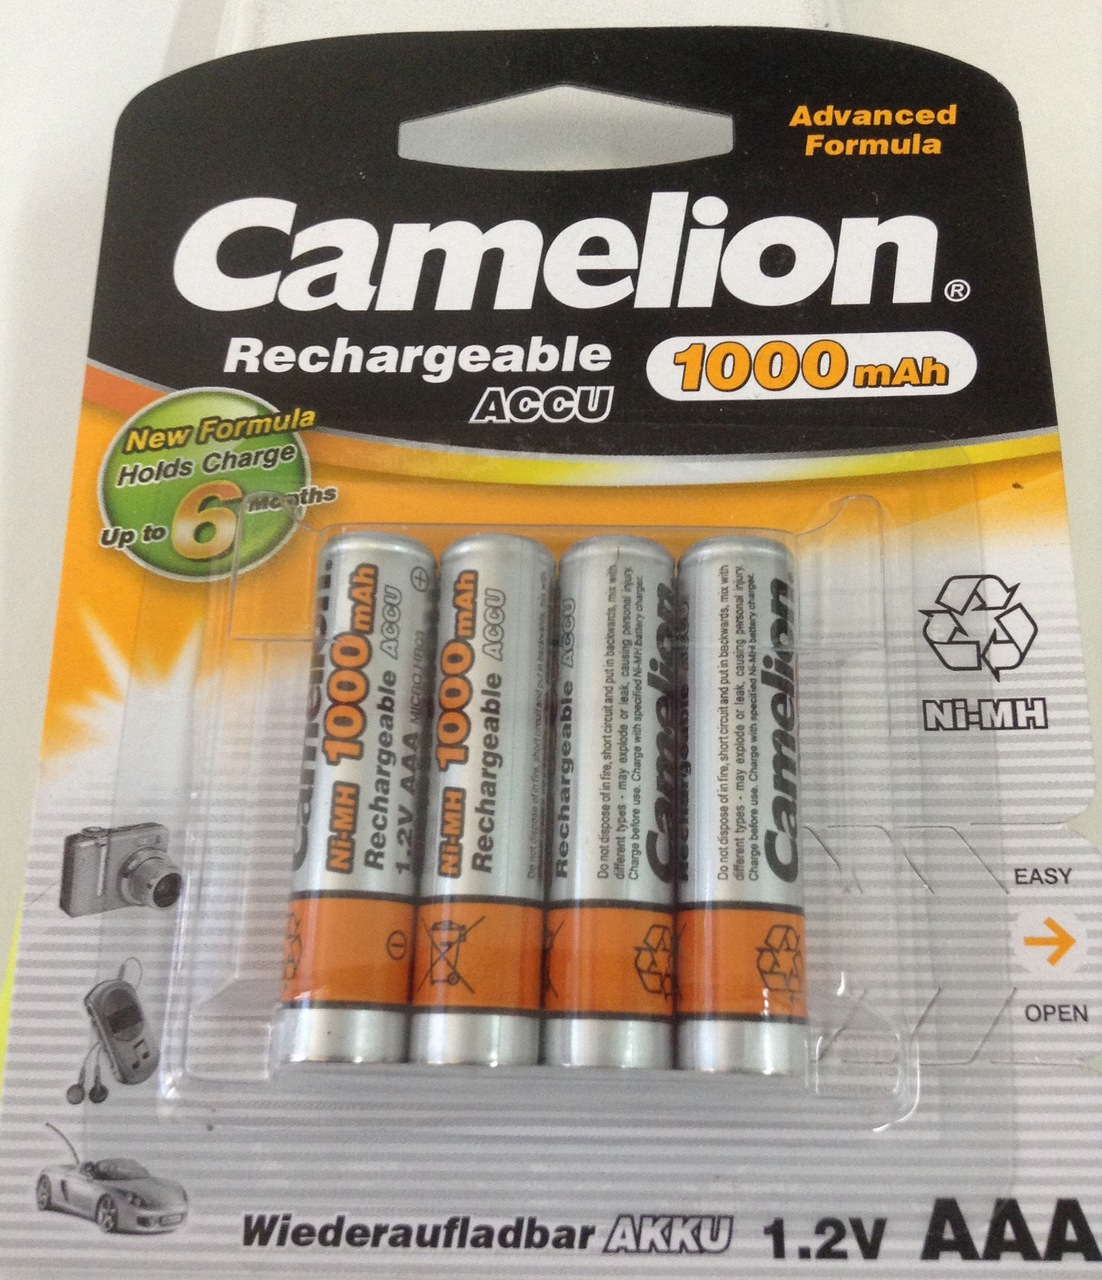 Camelion Advanced Formula AAA Rechargeable NiMH Batteries 1000mAh 4 Pack Retail + FREE SHIPPING!